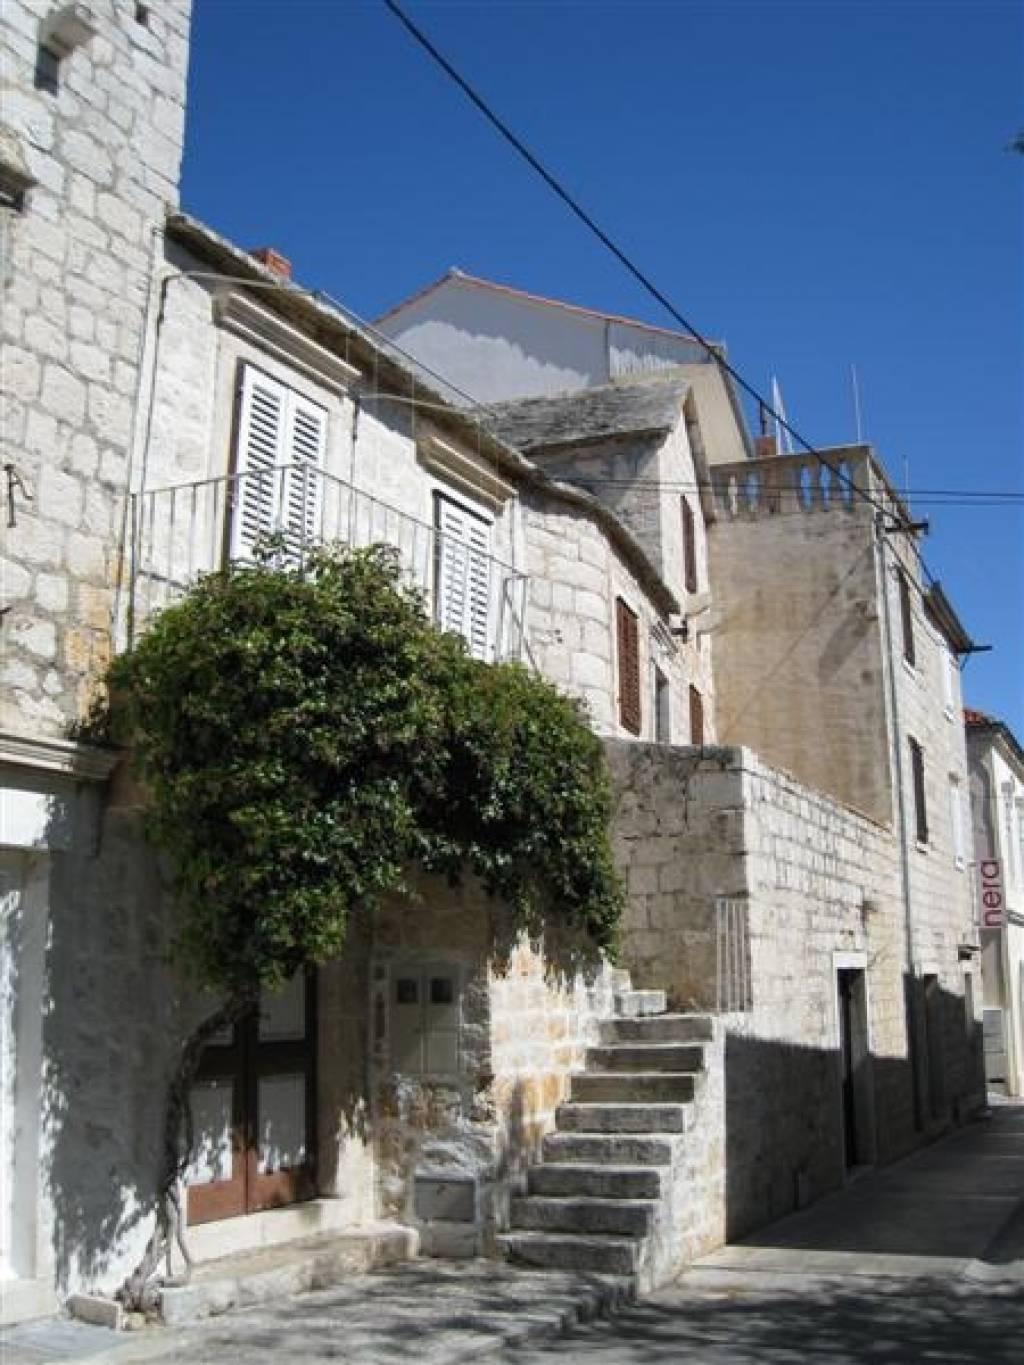 Typical stone house in the town